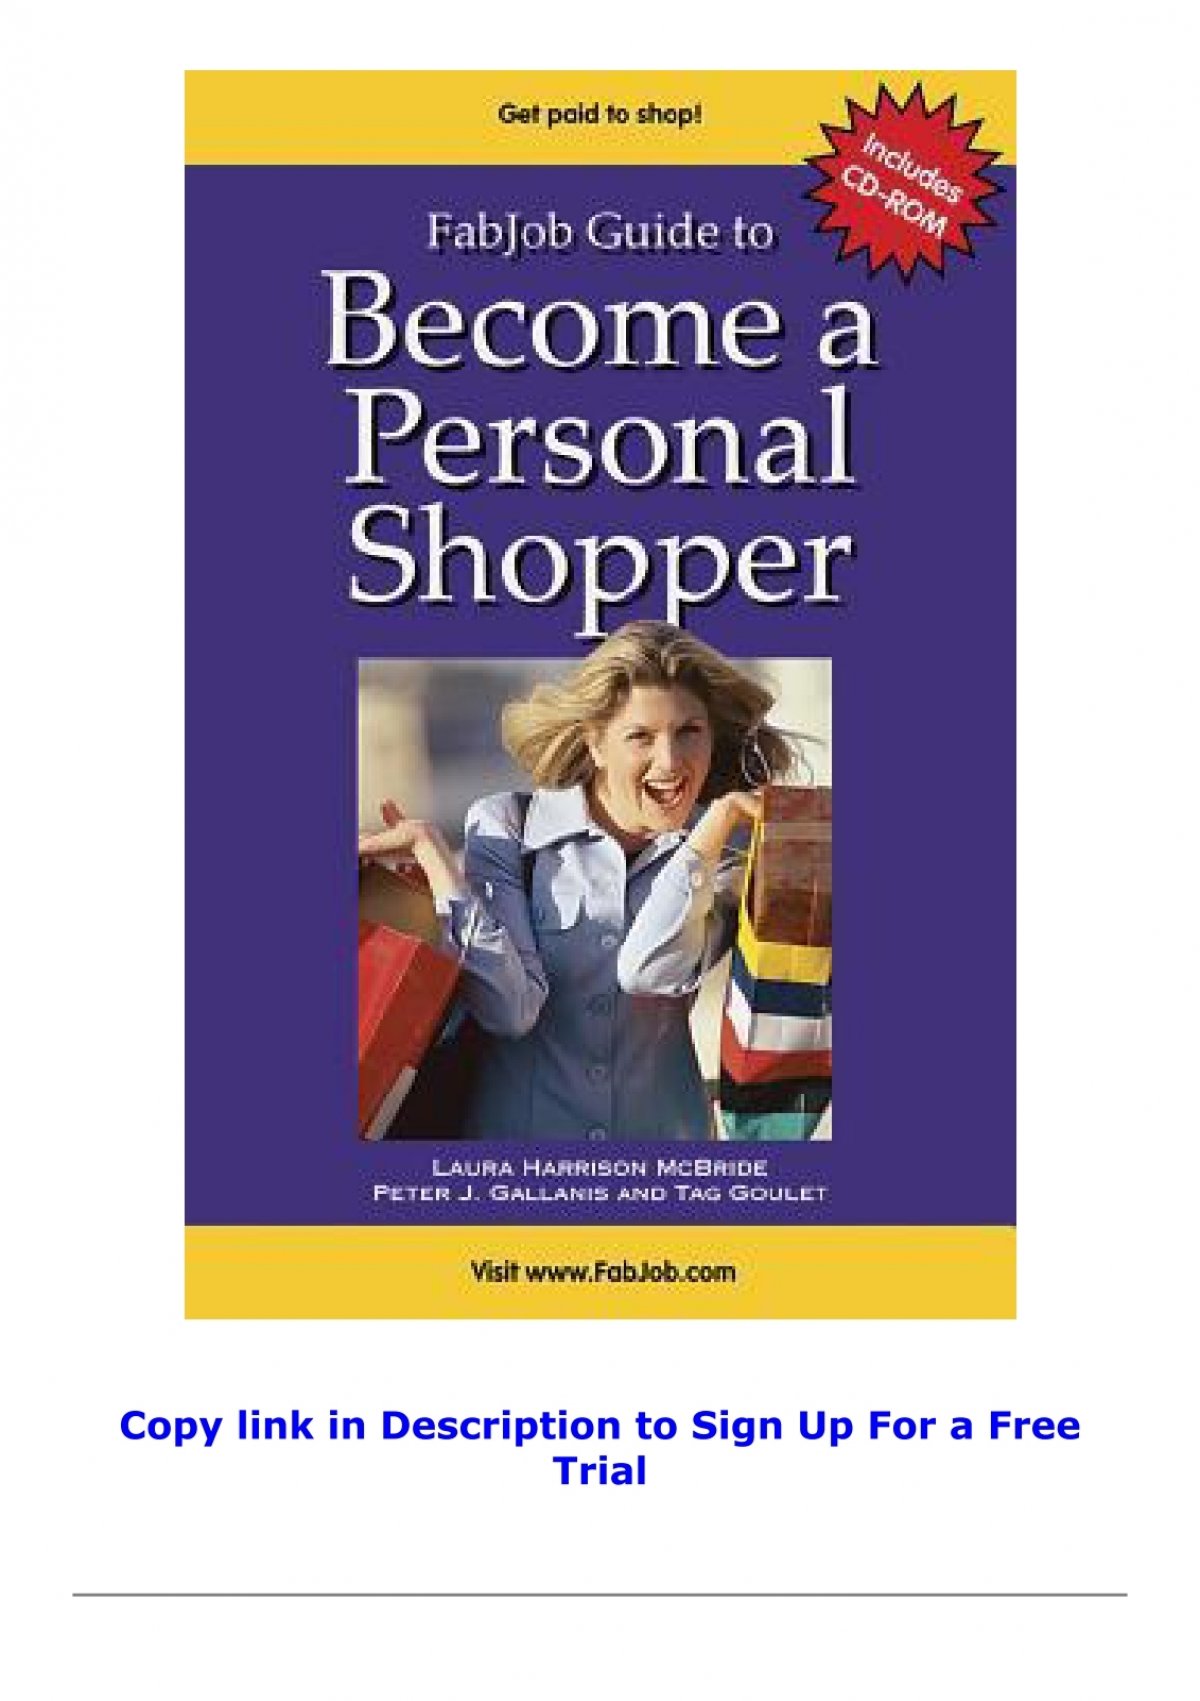 FabJob Guide to Become a Personal Shopper (FabJob Guides): Laura